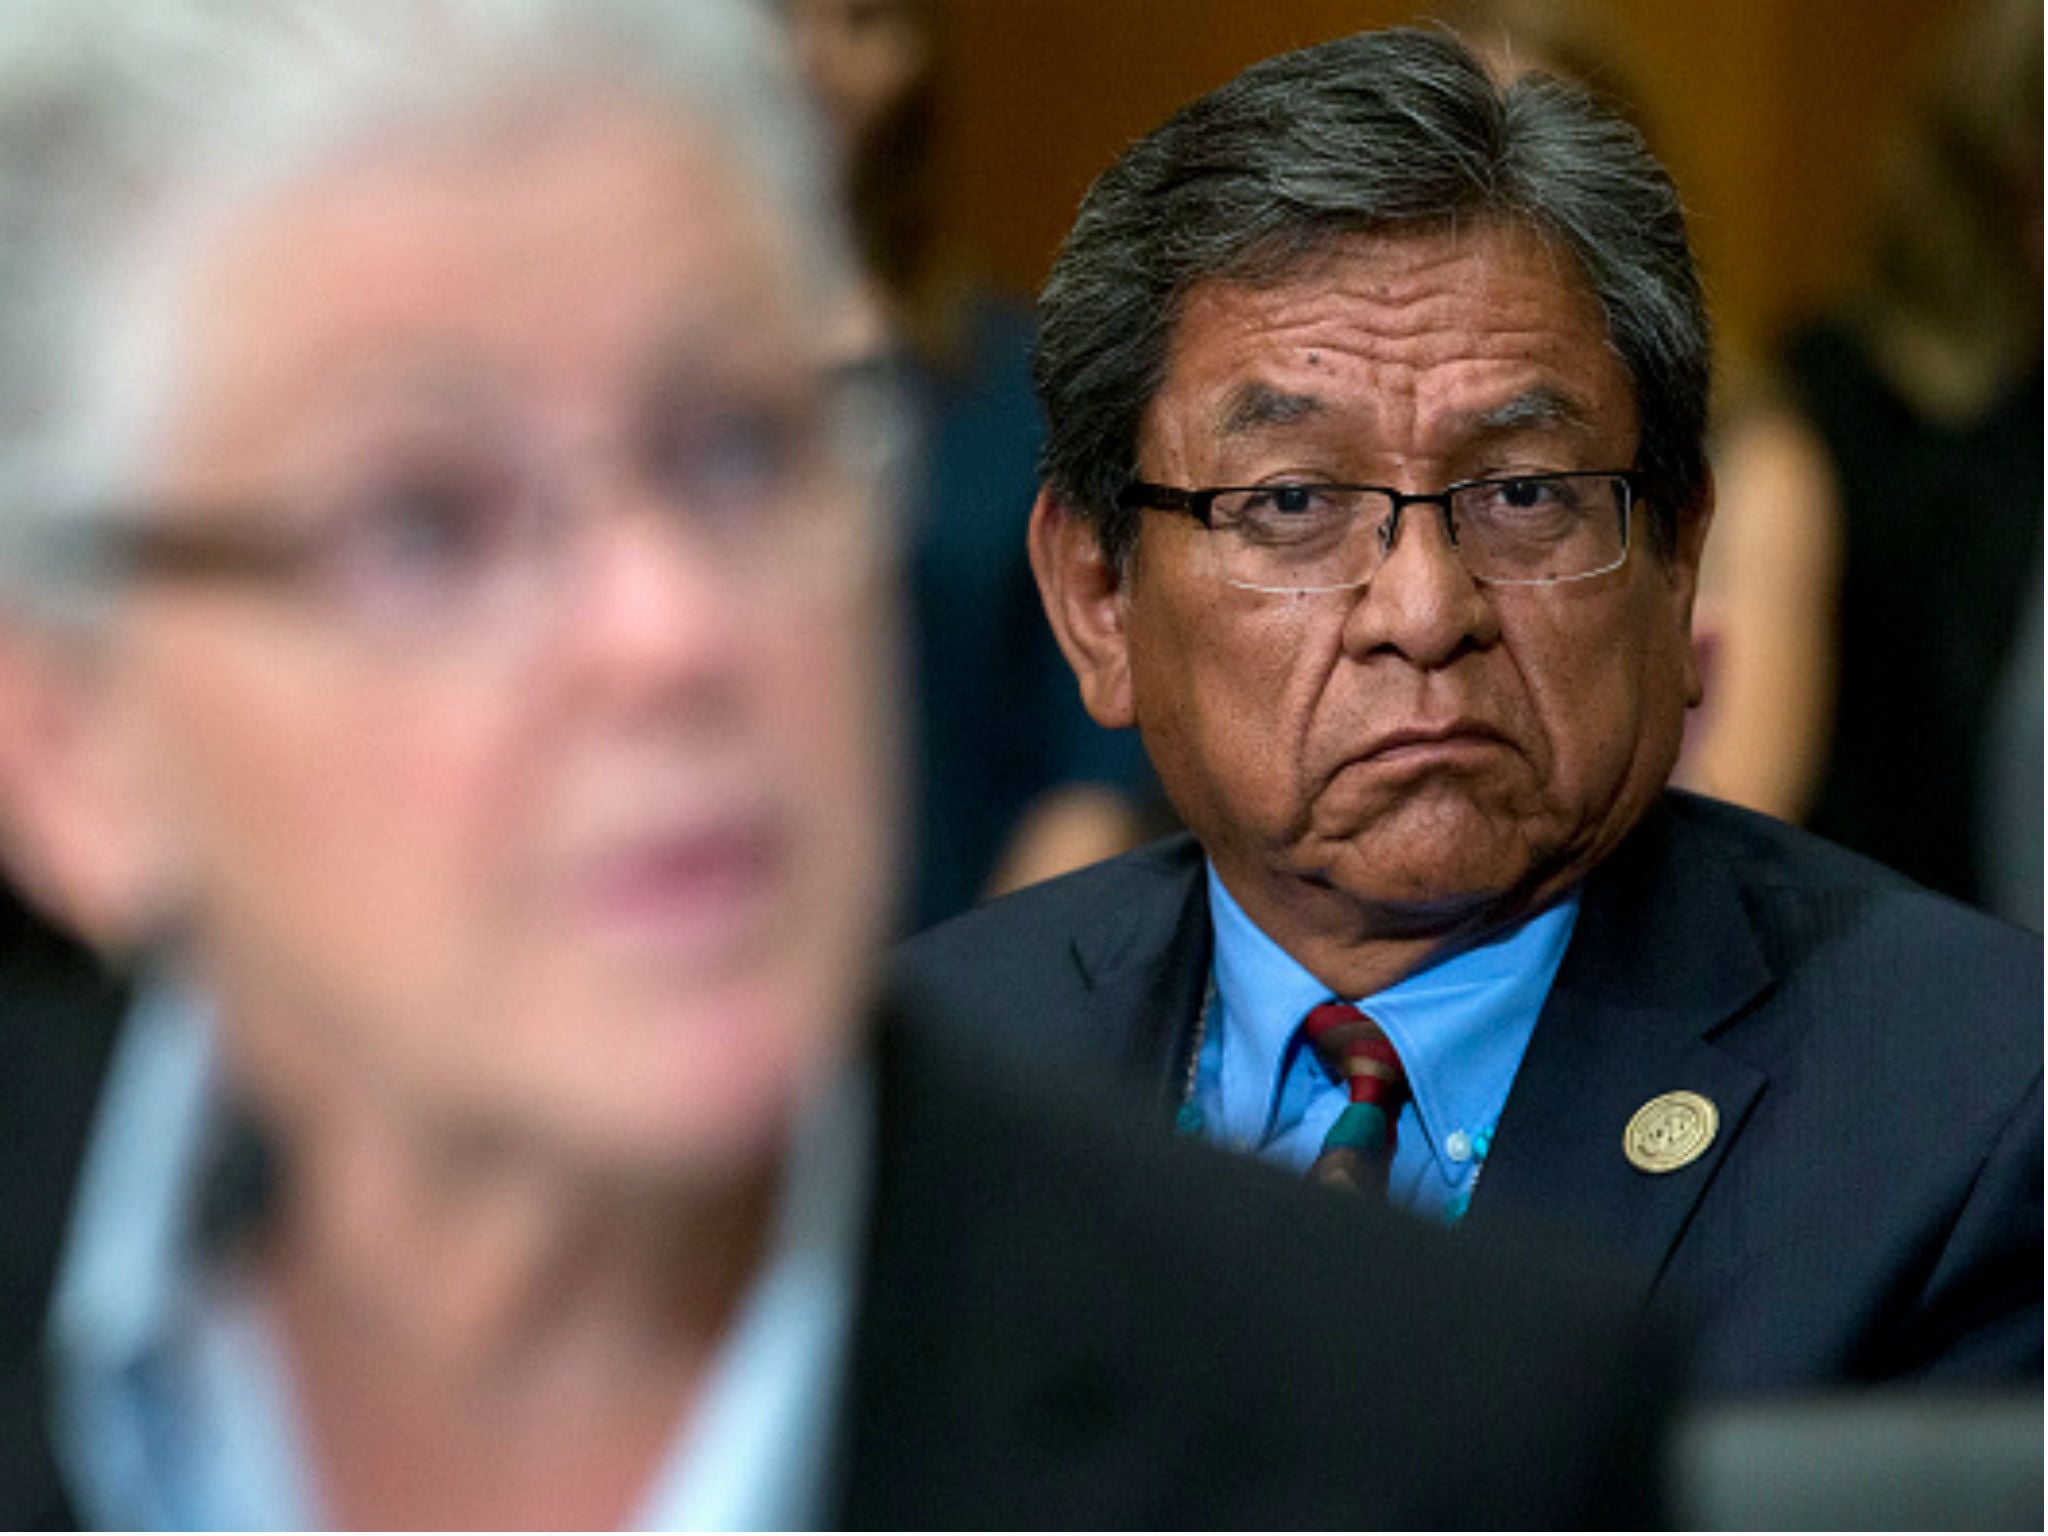 Navajo Nation president Russell Begaye - seen here in Washington, DC on Wednesday, Sept. 16, 2015 - reacted to Donald Trump's comment by referencing the "unfortunate historical legacy" of prejudice against Native Americans